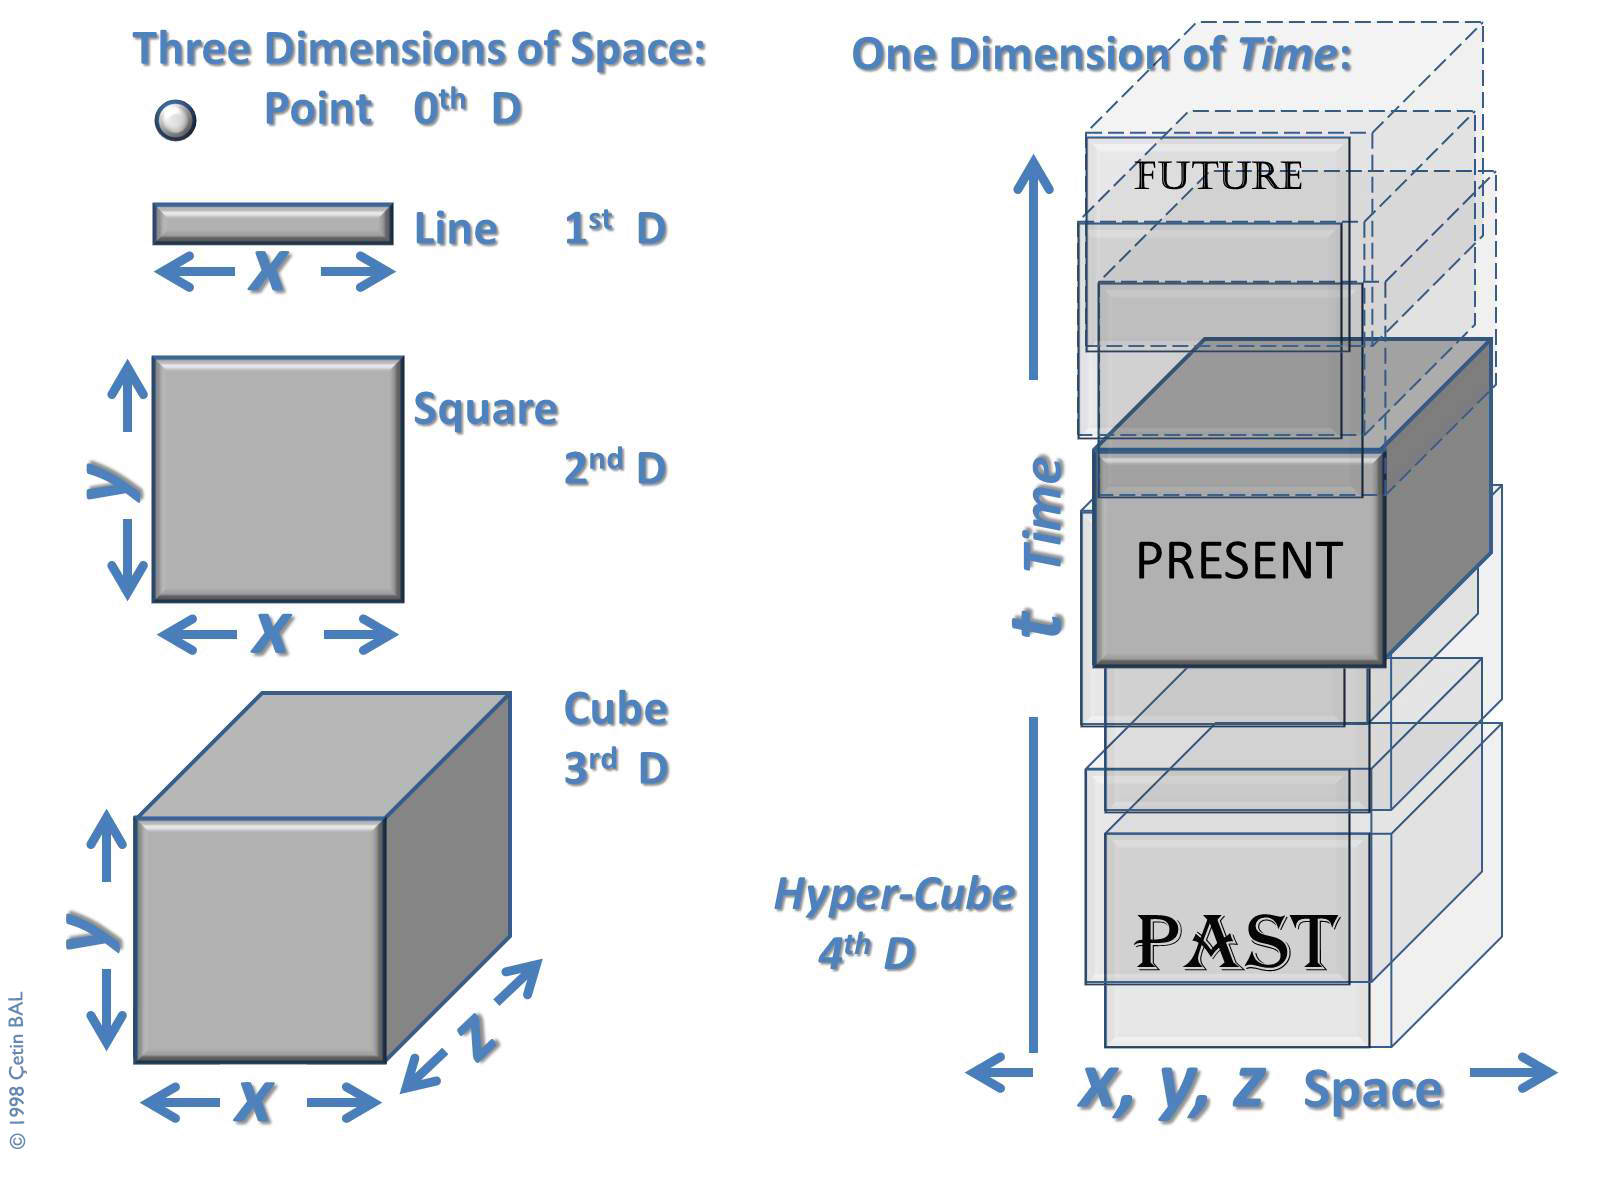 2time dimensions | The soul’s projection and incarnations through spacetime